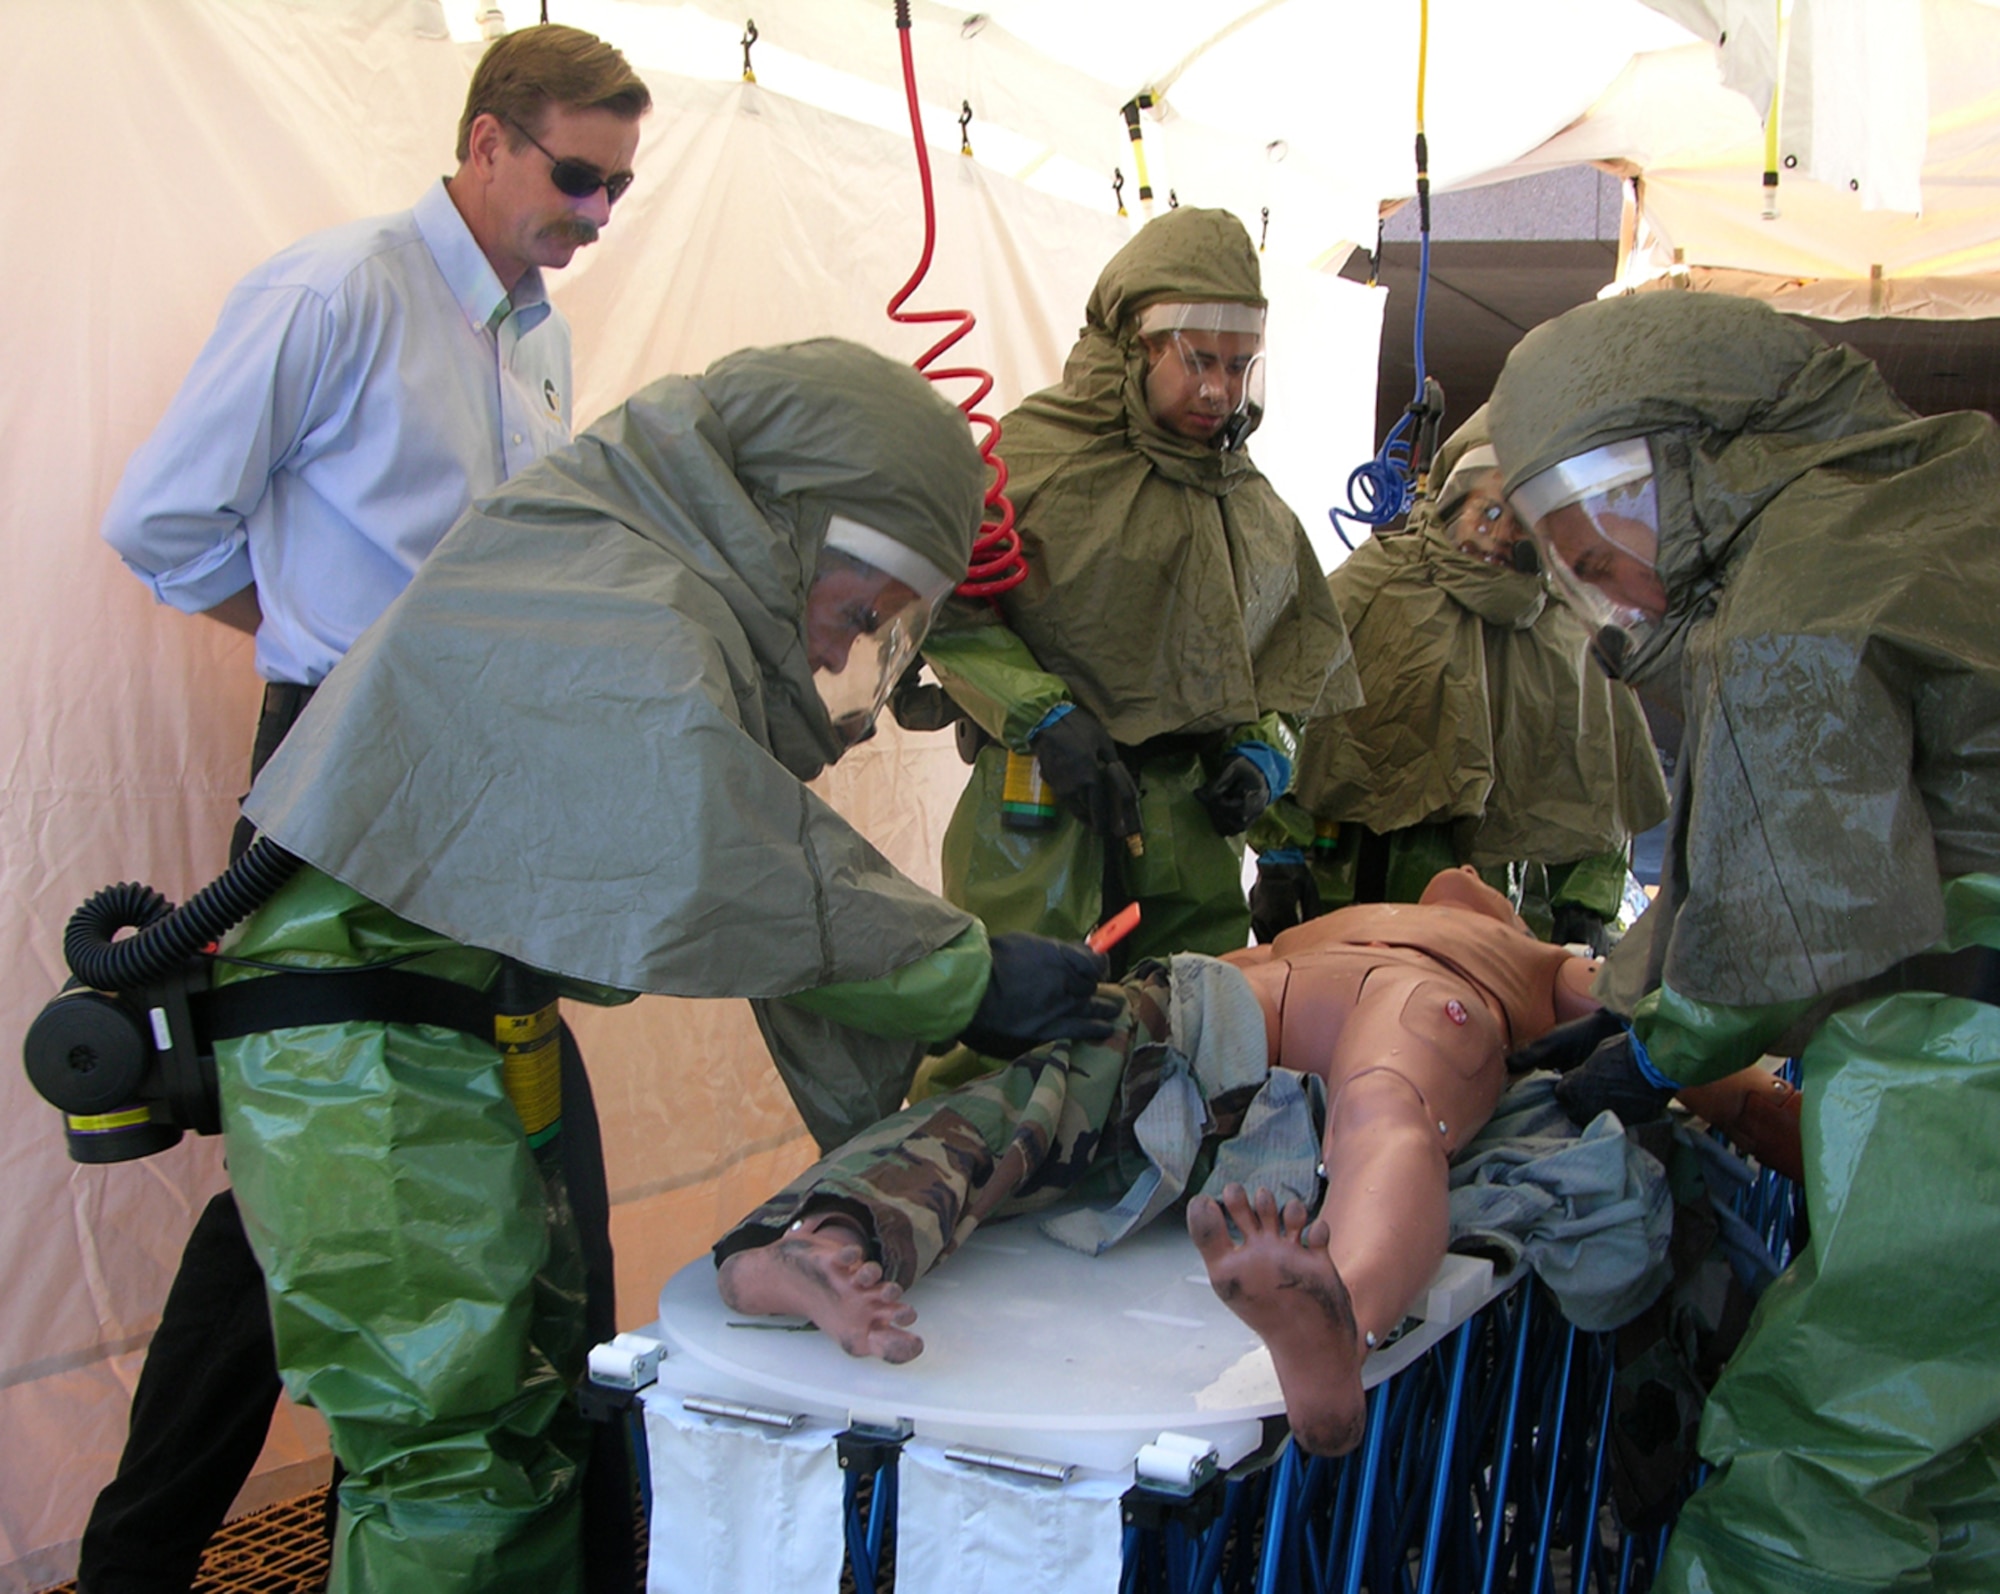 Tom Bocek, (far left) a training representative with Air Combat Command, teaches decontamination procedures to Airmen from a 99th Medical Group In-Place Patient Decontamination team outside the Mike O'Callaghan Hospital here, Oct. 25. The three days of training scenarios were aimed at teaching Airmen how to protect medical facility resources and treat patients after a chemical, biological, radiological, nuclear or explosive attack. (U.S. Air Force photo by Tech. Sgt. Benjamin Reynoso)